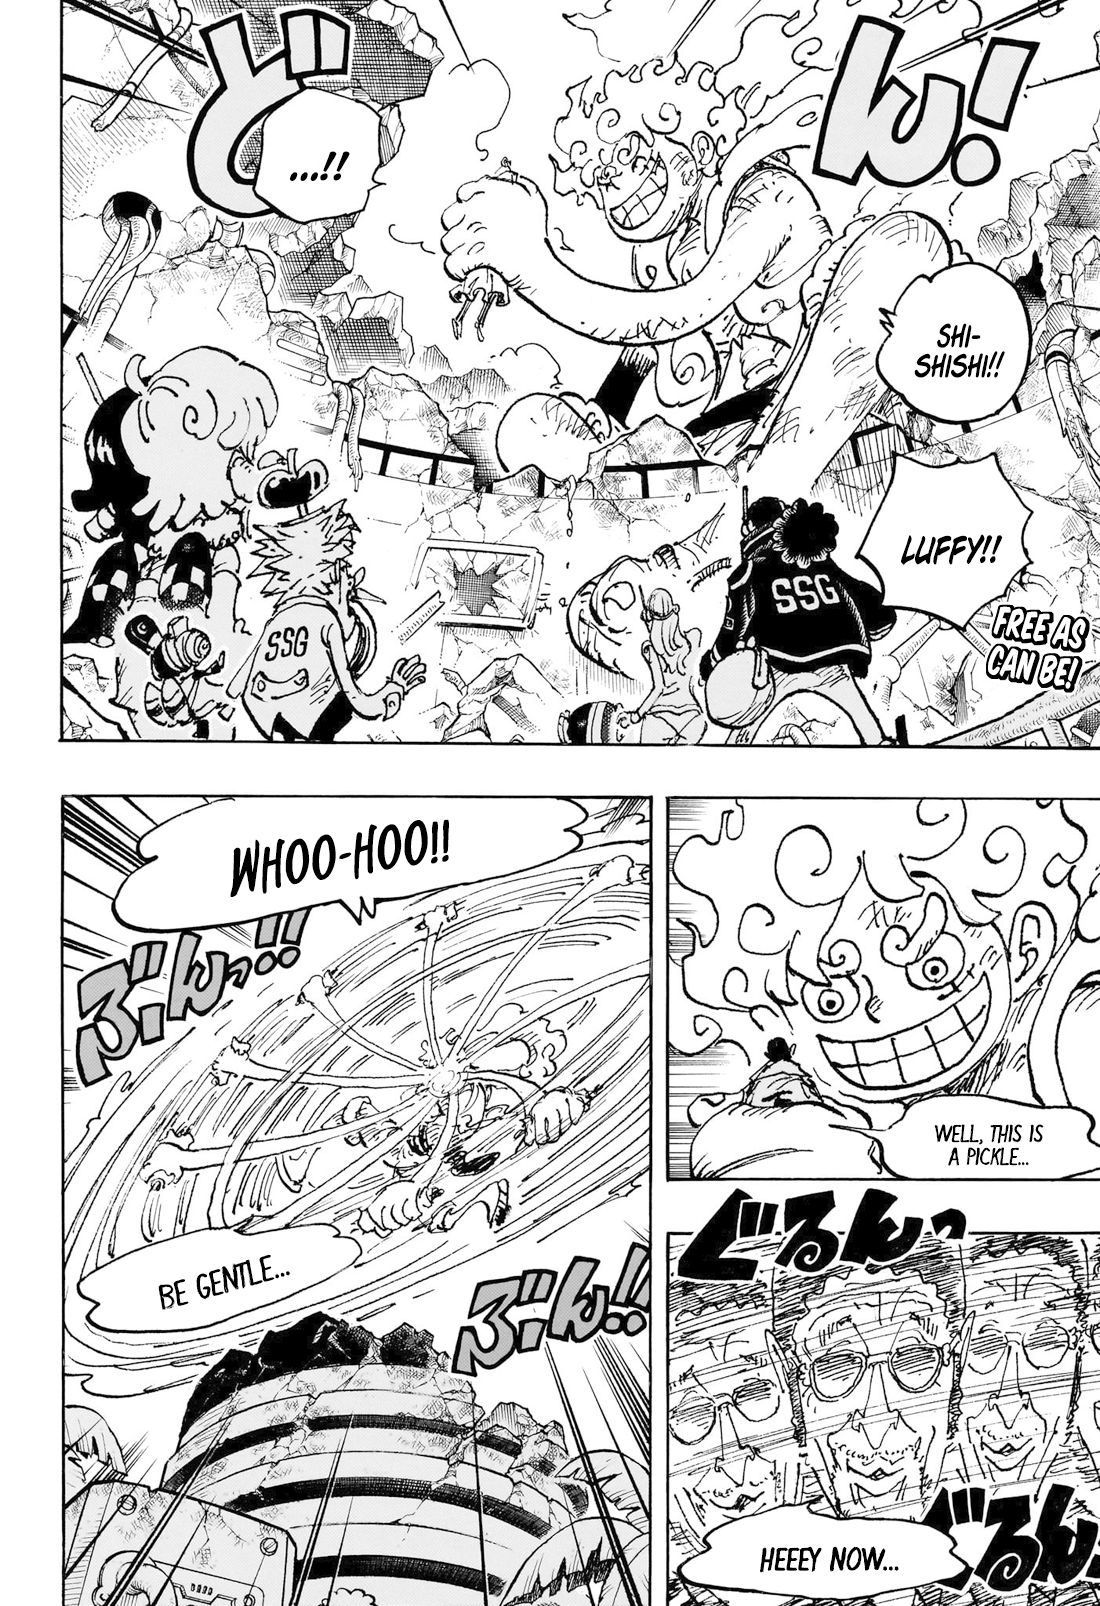 Spoiler - Spoiler One Piece Chapter 1057 Spoilers Discussion, Page 458